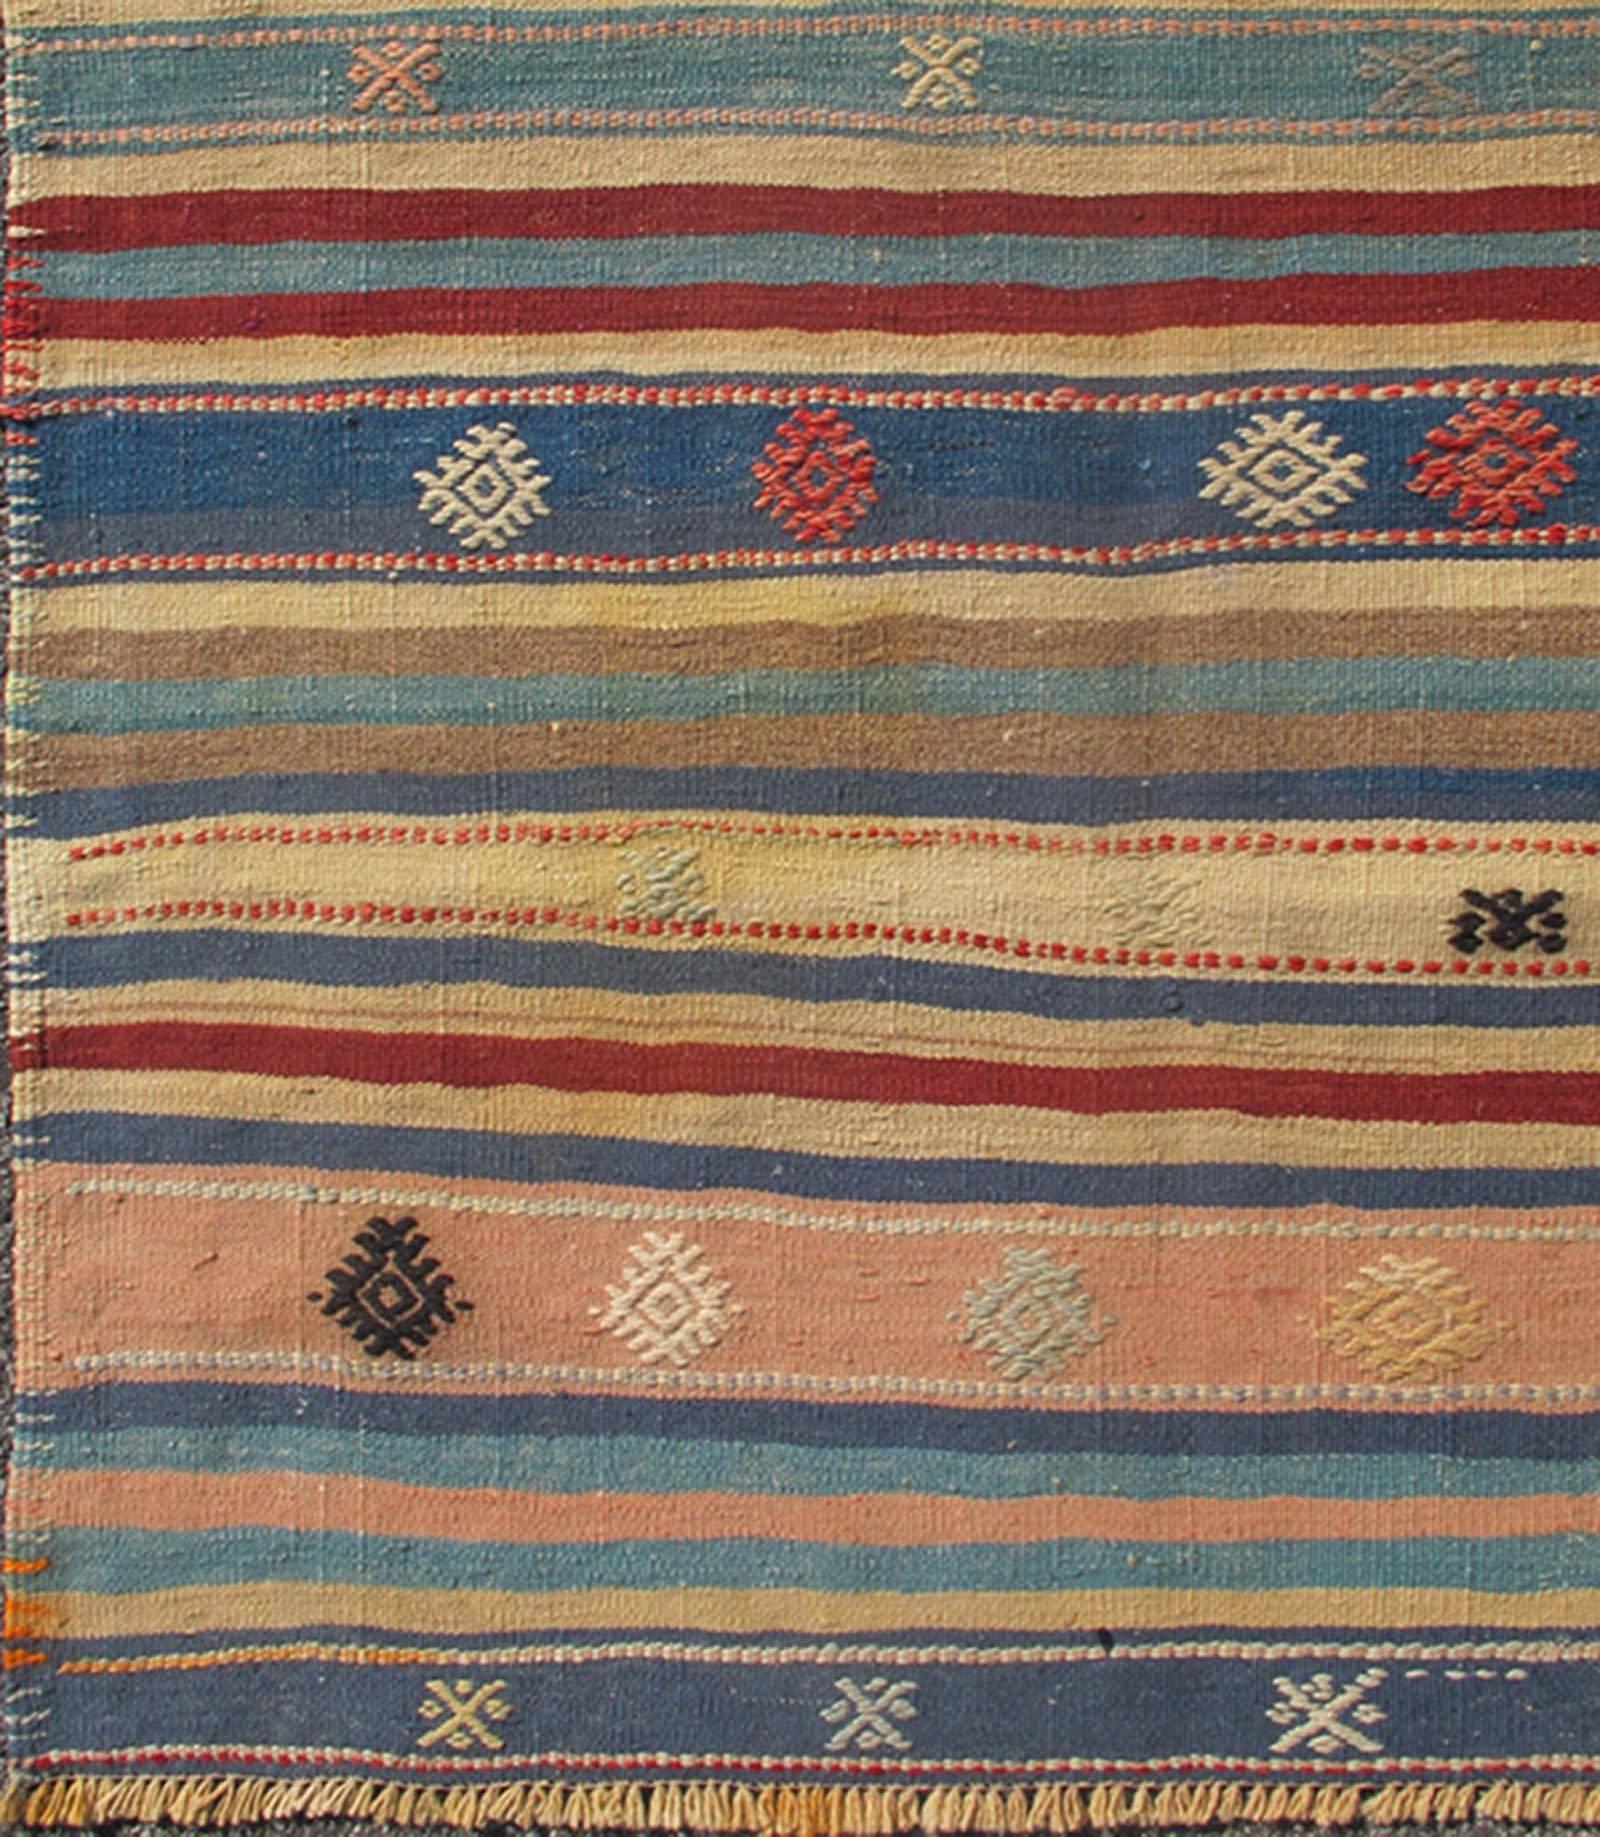 Colorful vintage Turkish Kilim rug with horizontal stripes and tribal designs, rug emd-136530, country of origin / type: Turkey / Kilim, circa mid-20th century

Featuring tribal shapes with a spotted and speckled assortment of geometric elements,